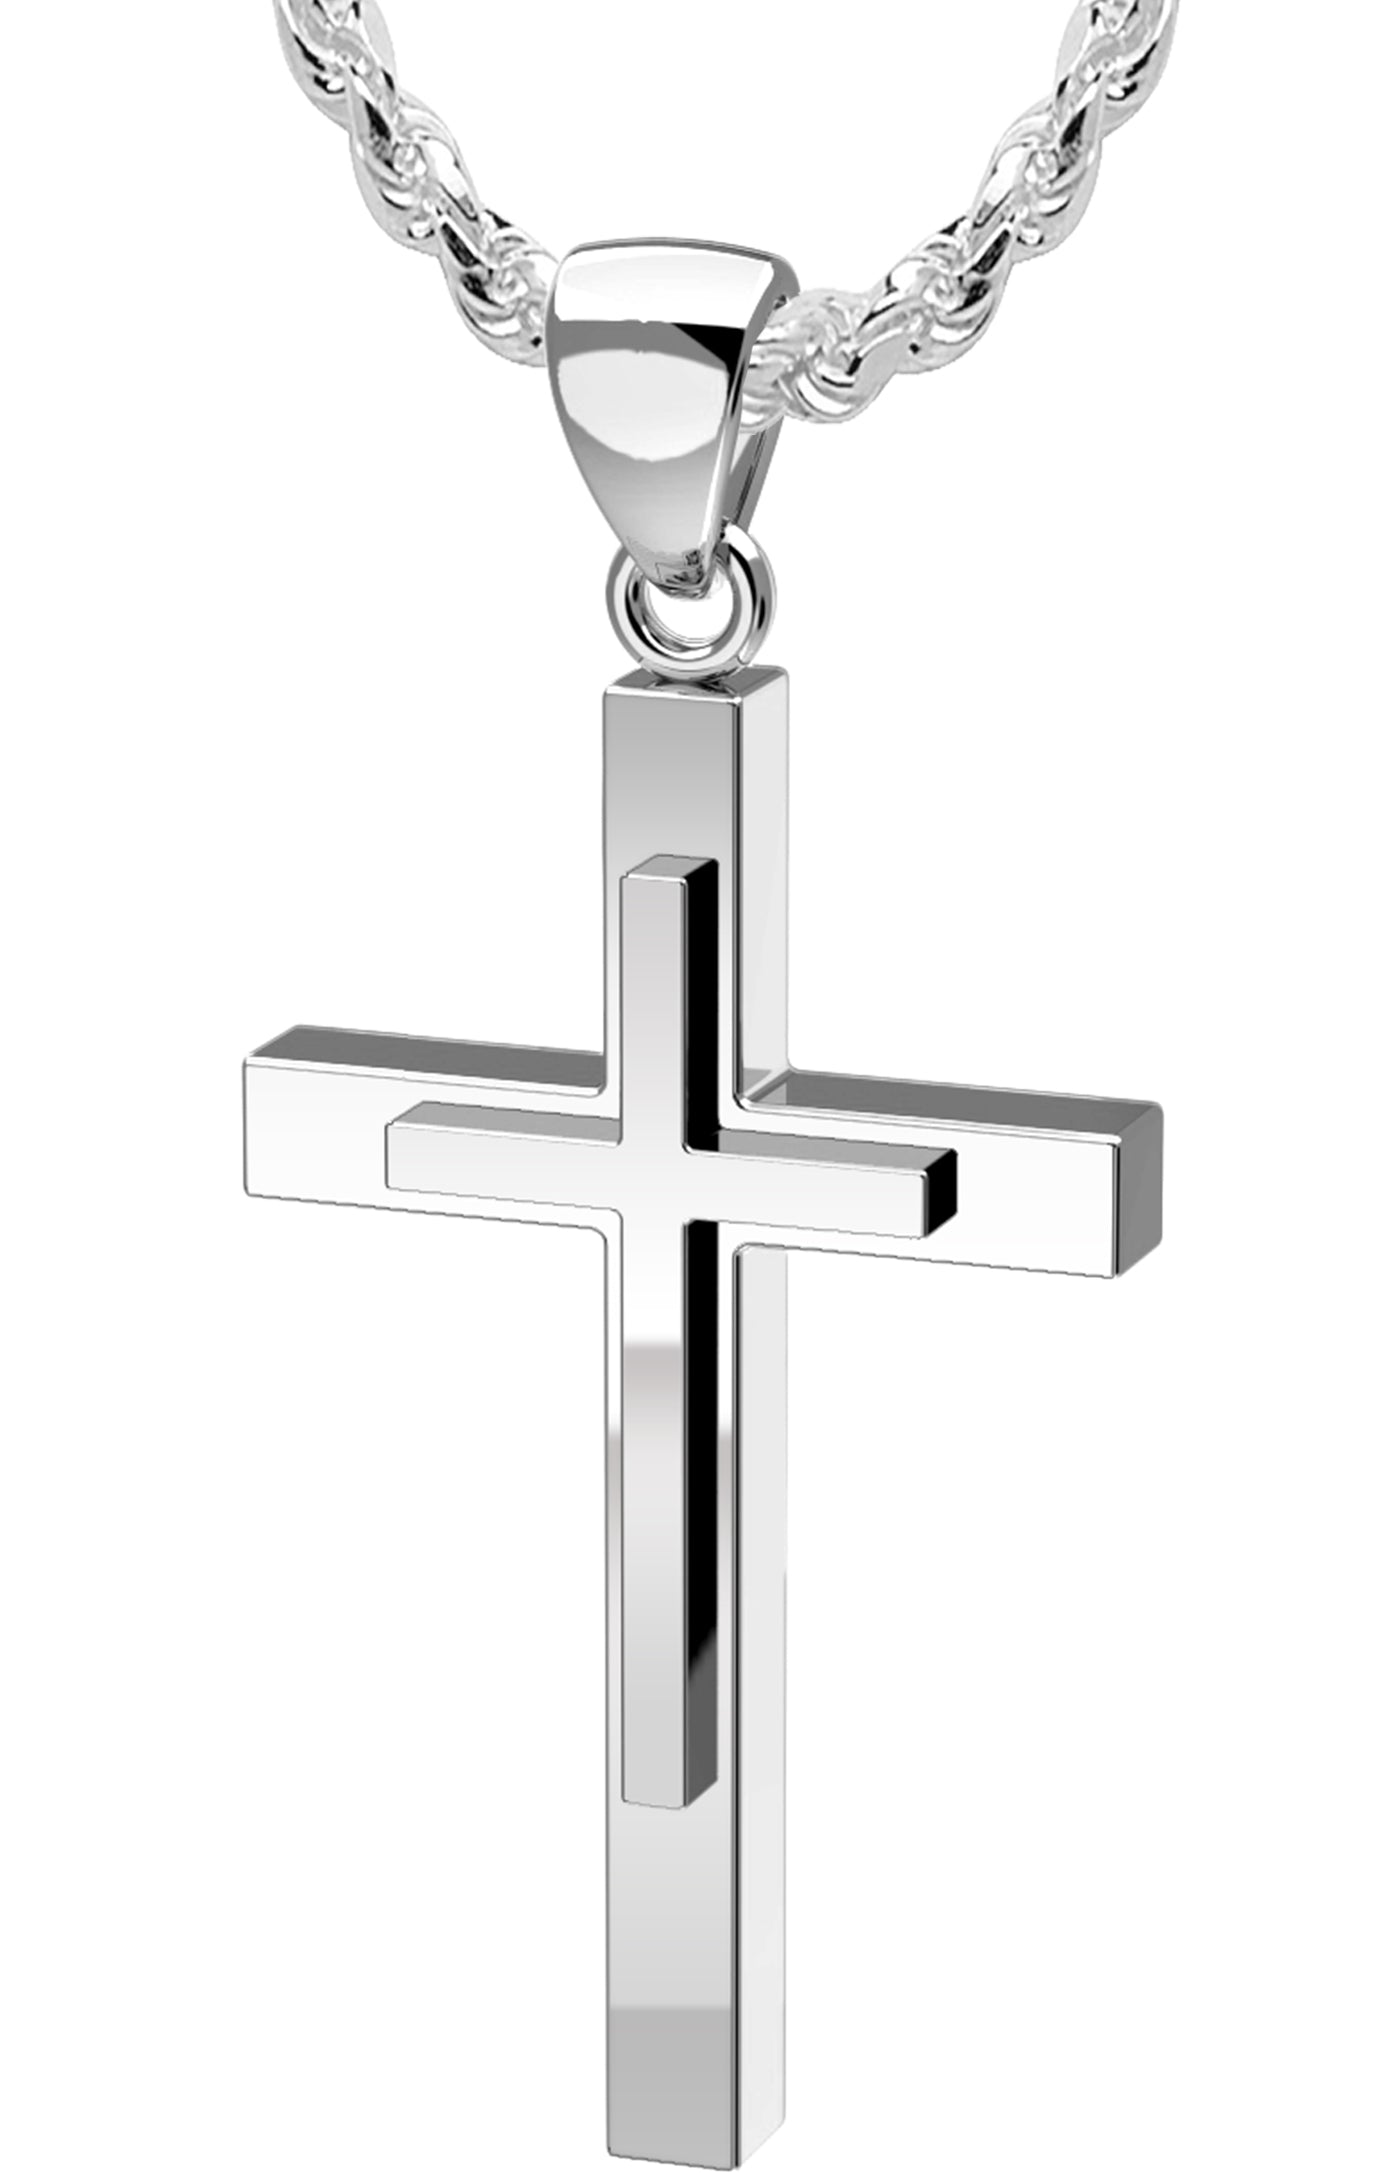 Christian XL Cross Necklace - Cross Pendant Made for Men 22in 4.9mm Miami Cuban Chain